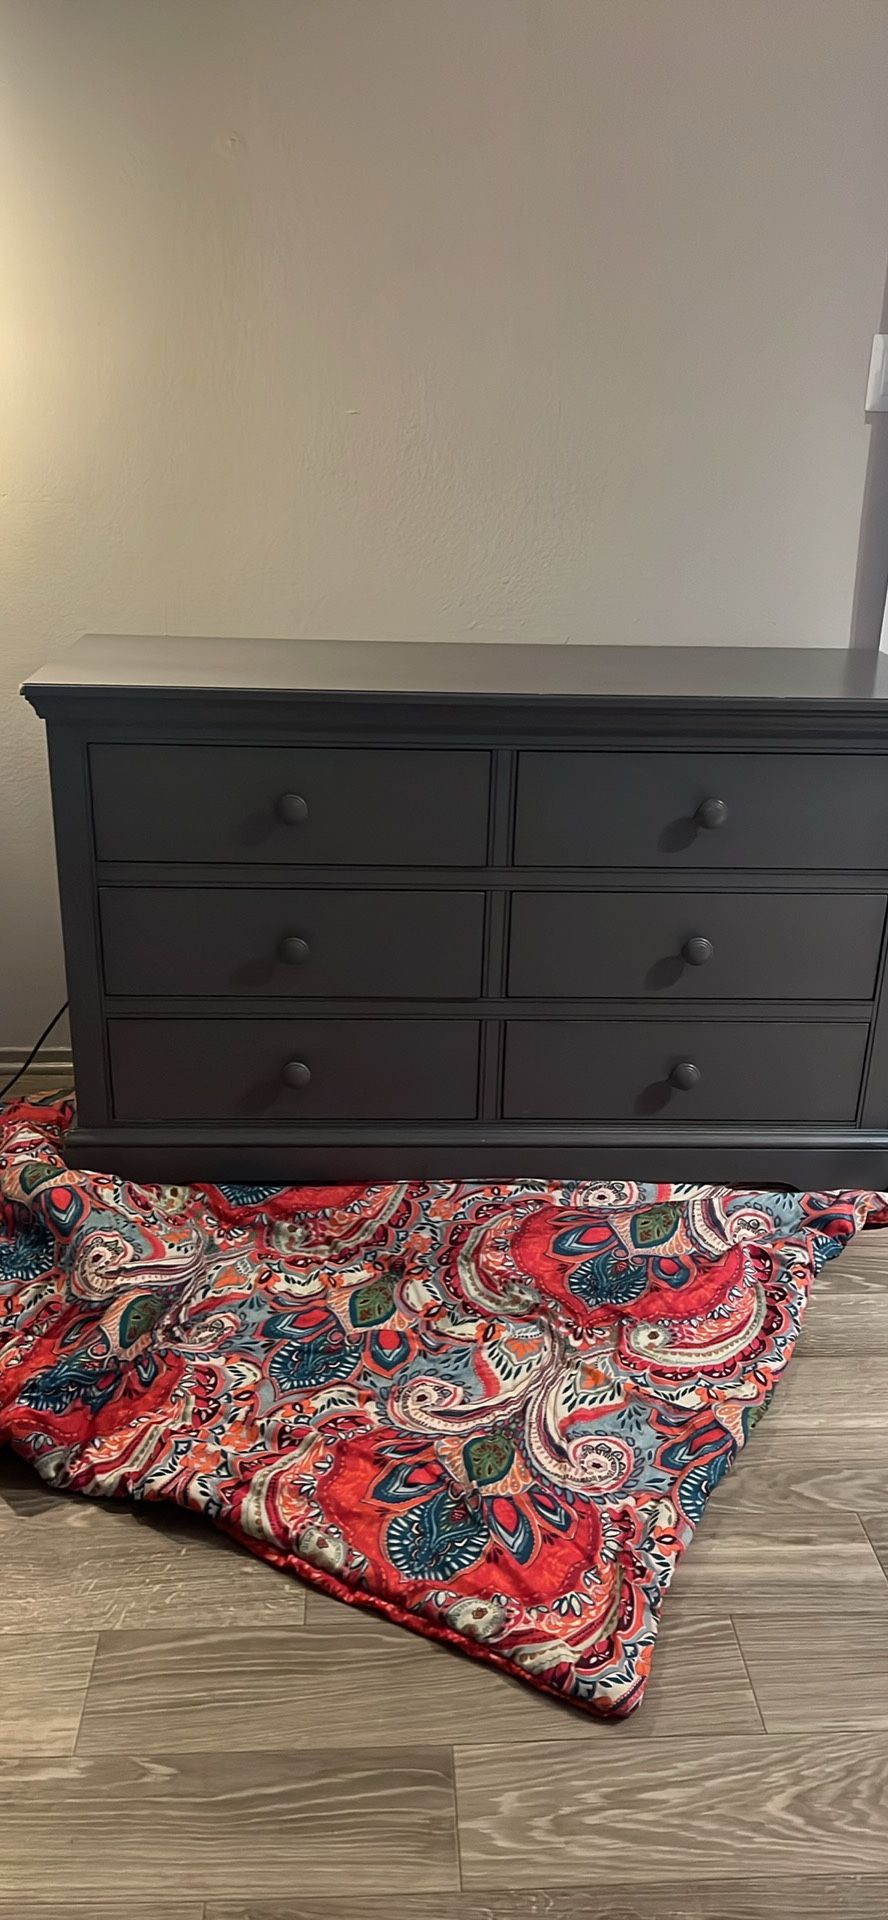 Dresser and Nightstand for sale!